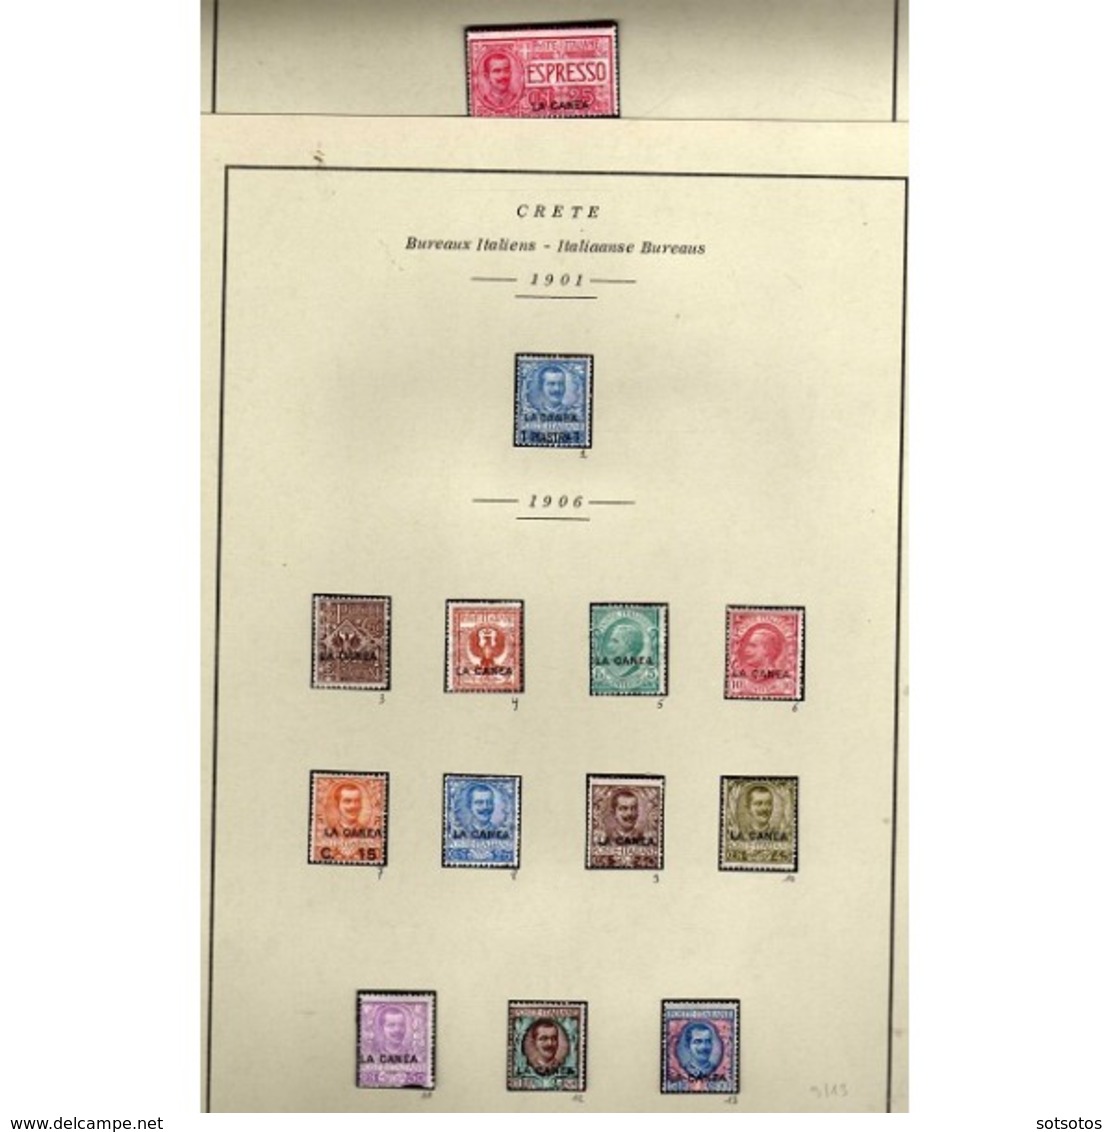 CRETE: Nice Collection Of 13 Mint Stamps - Of  Italian Post Office - Catalogue Value: HELLAS - 518€, ΕΡΜΗΣ - 384,50€ - Crete